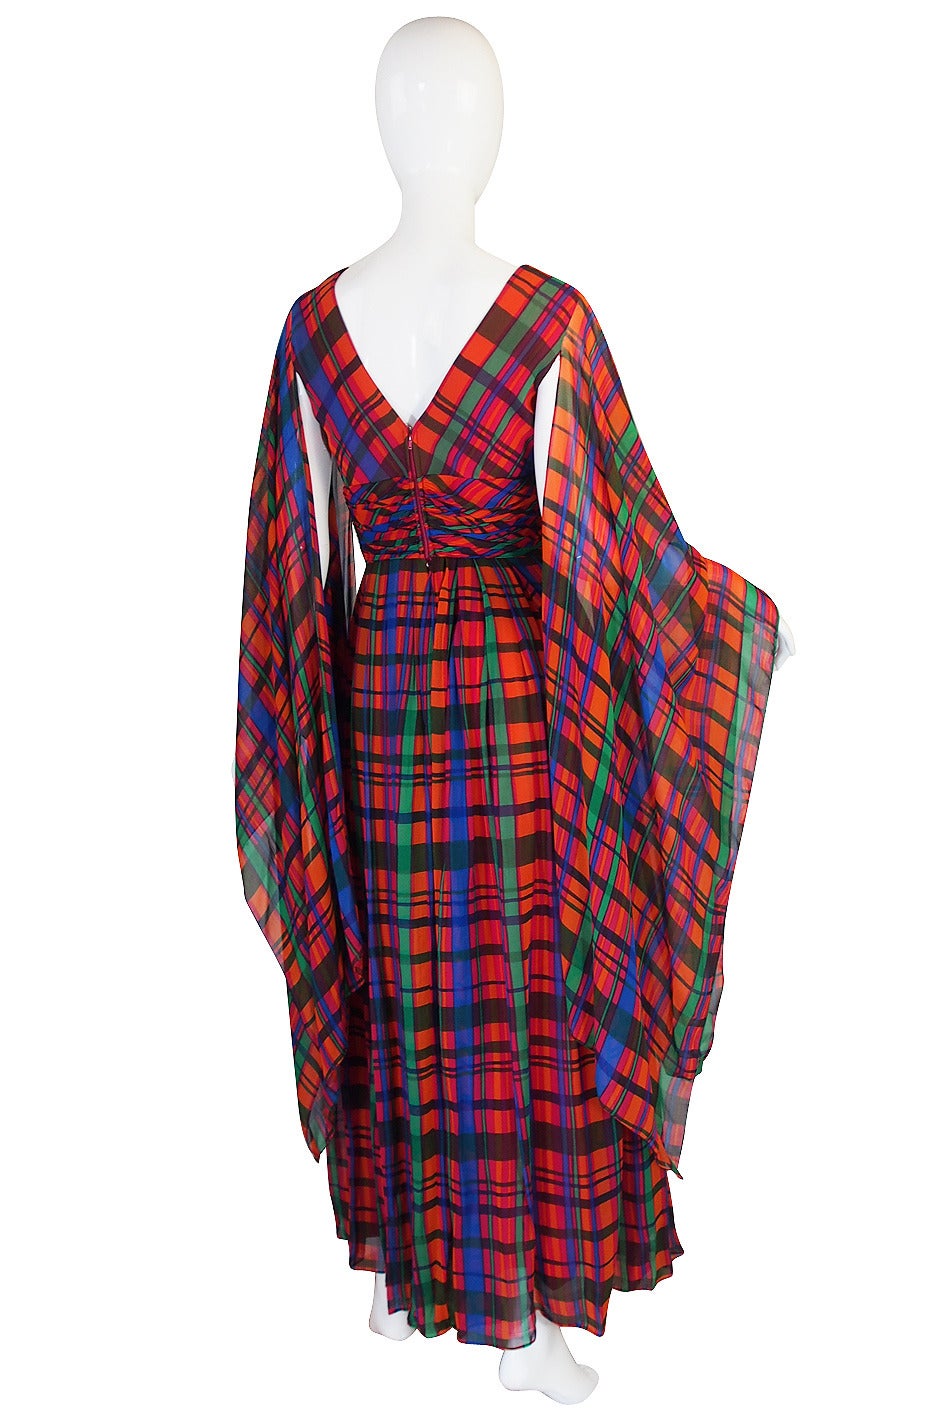 This is a fabulous 1960s Mollie Parnis and I think one of my favorite pieces by her to have ever hit the shop - it is hard not to love such a strong statement piece. It is certainly one of the most dramatic dresses I have seen and yet it still has a